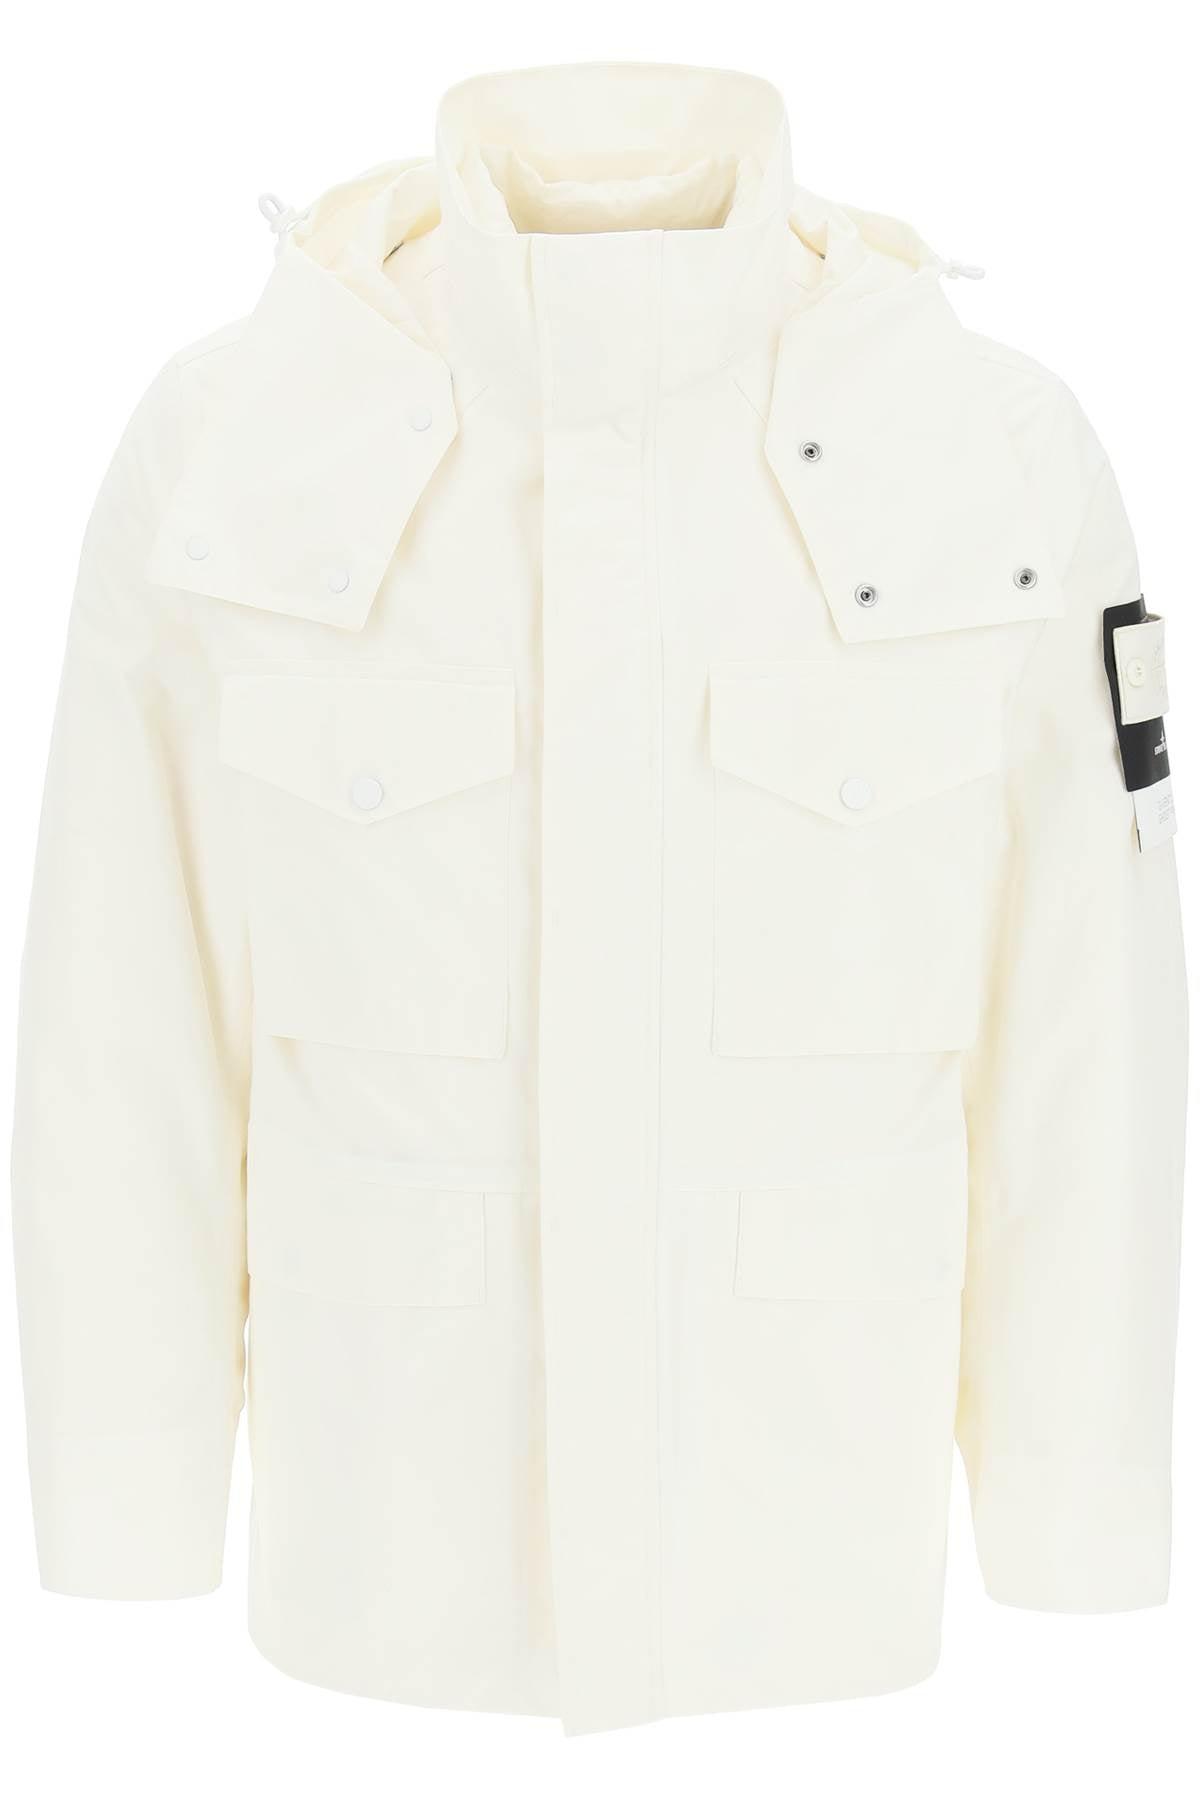 Stone Island Ghost Piece Jacket in White for Men | Lyst